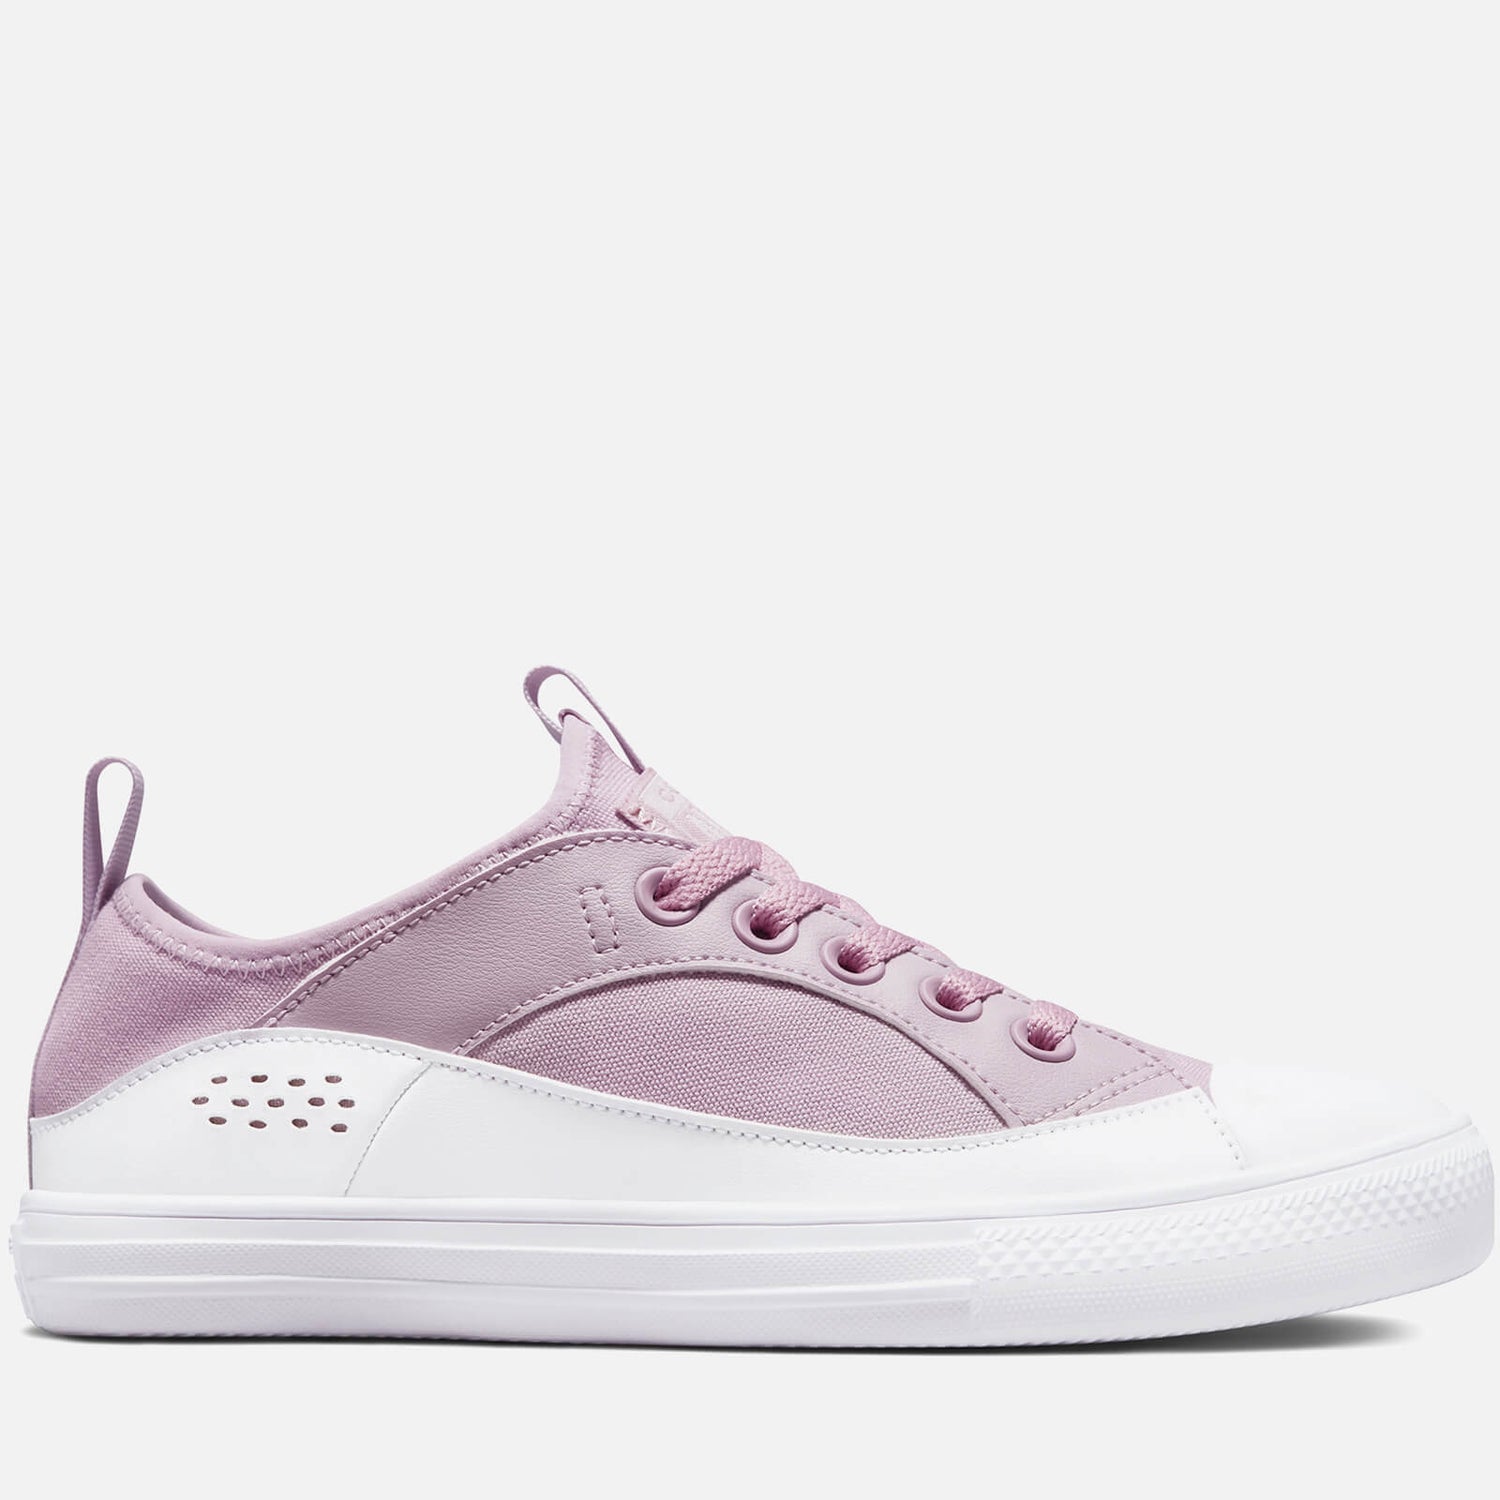 Converse Women's Chuck Taylor All Star Wave Ultra Ox Trainers - Peaceful Plum/White - UK 3